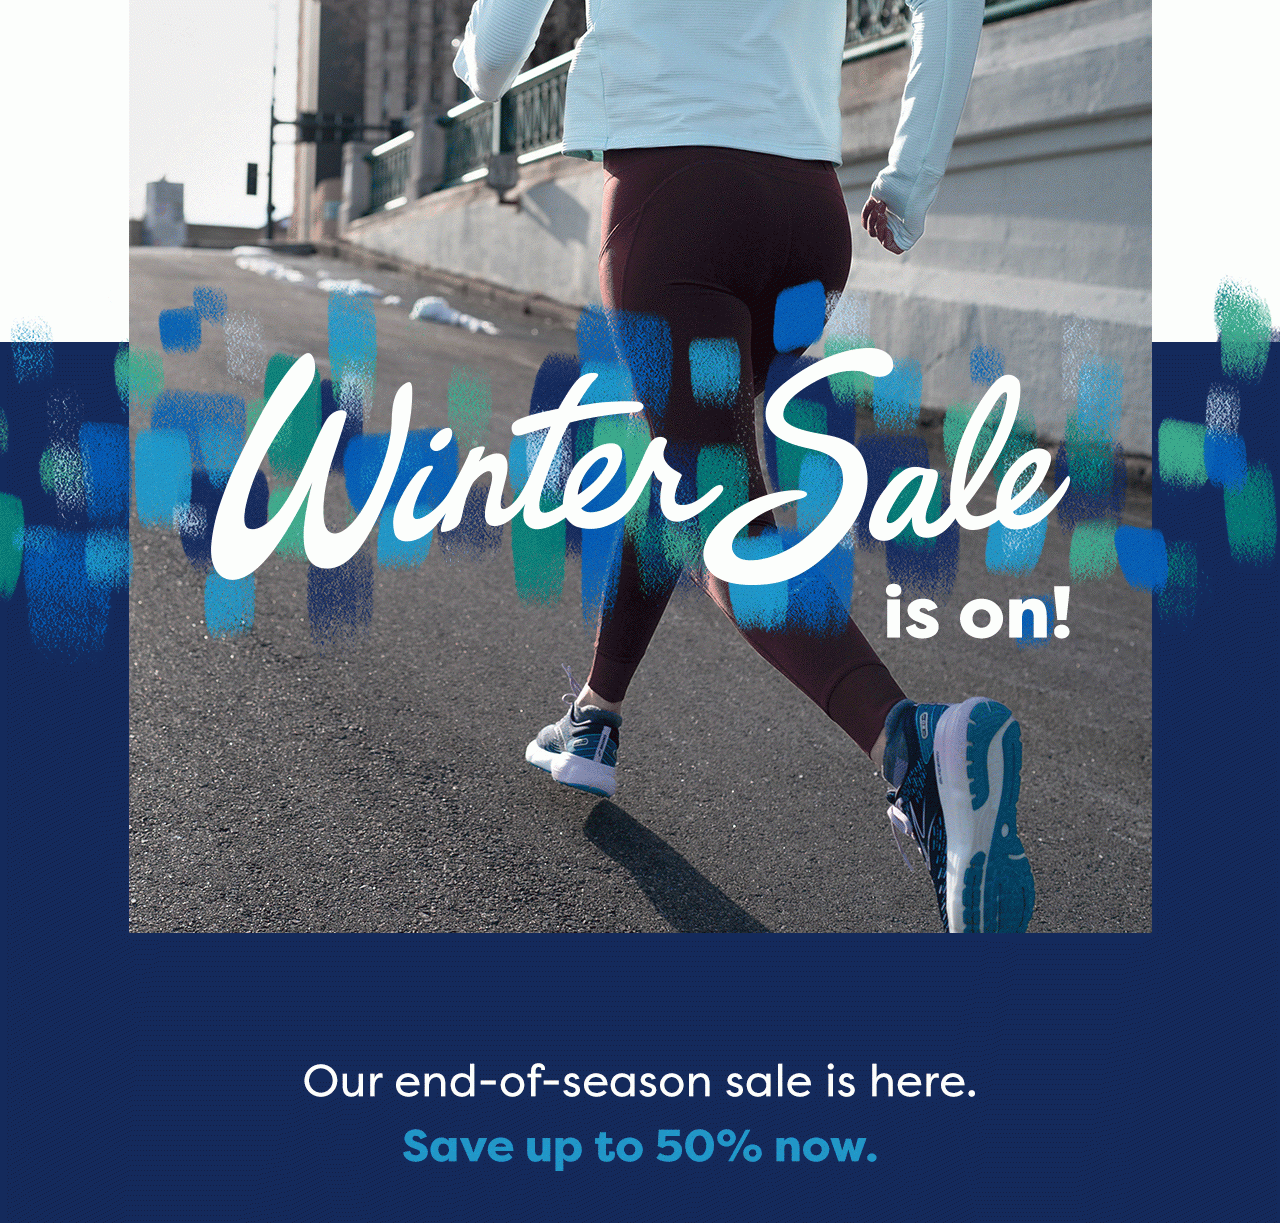 Winter Sale is on! - Our end-of-the-season sale is here. Save up to 50% now.